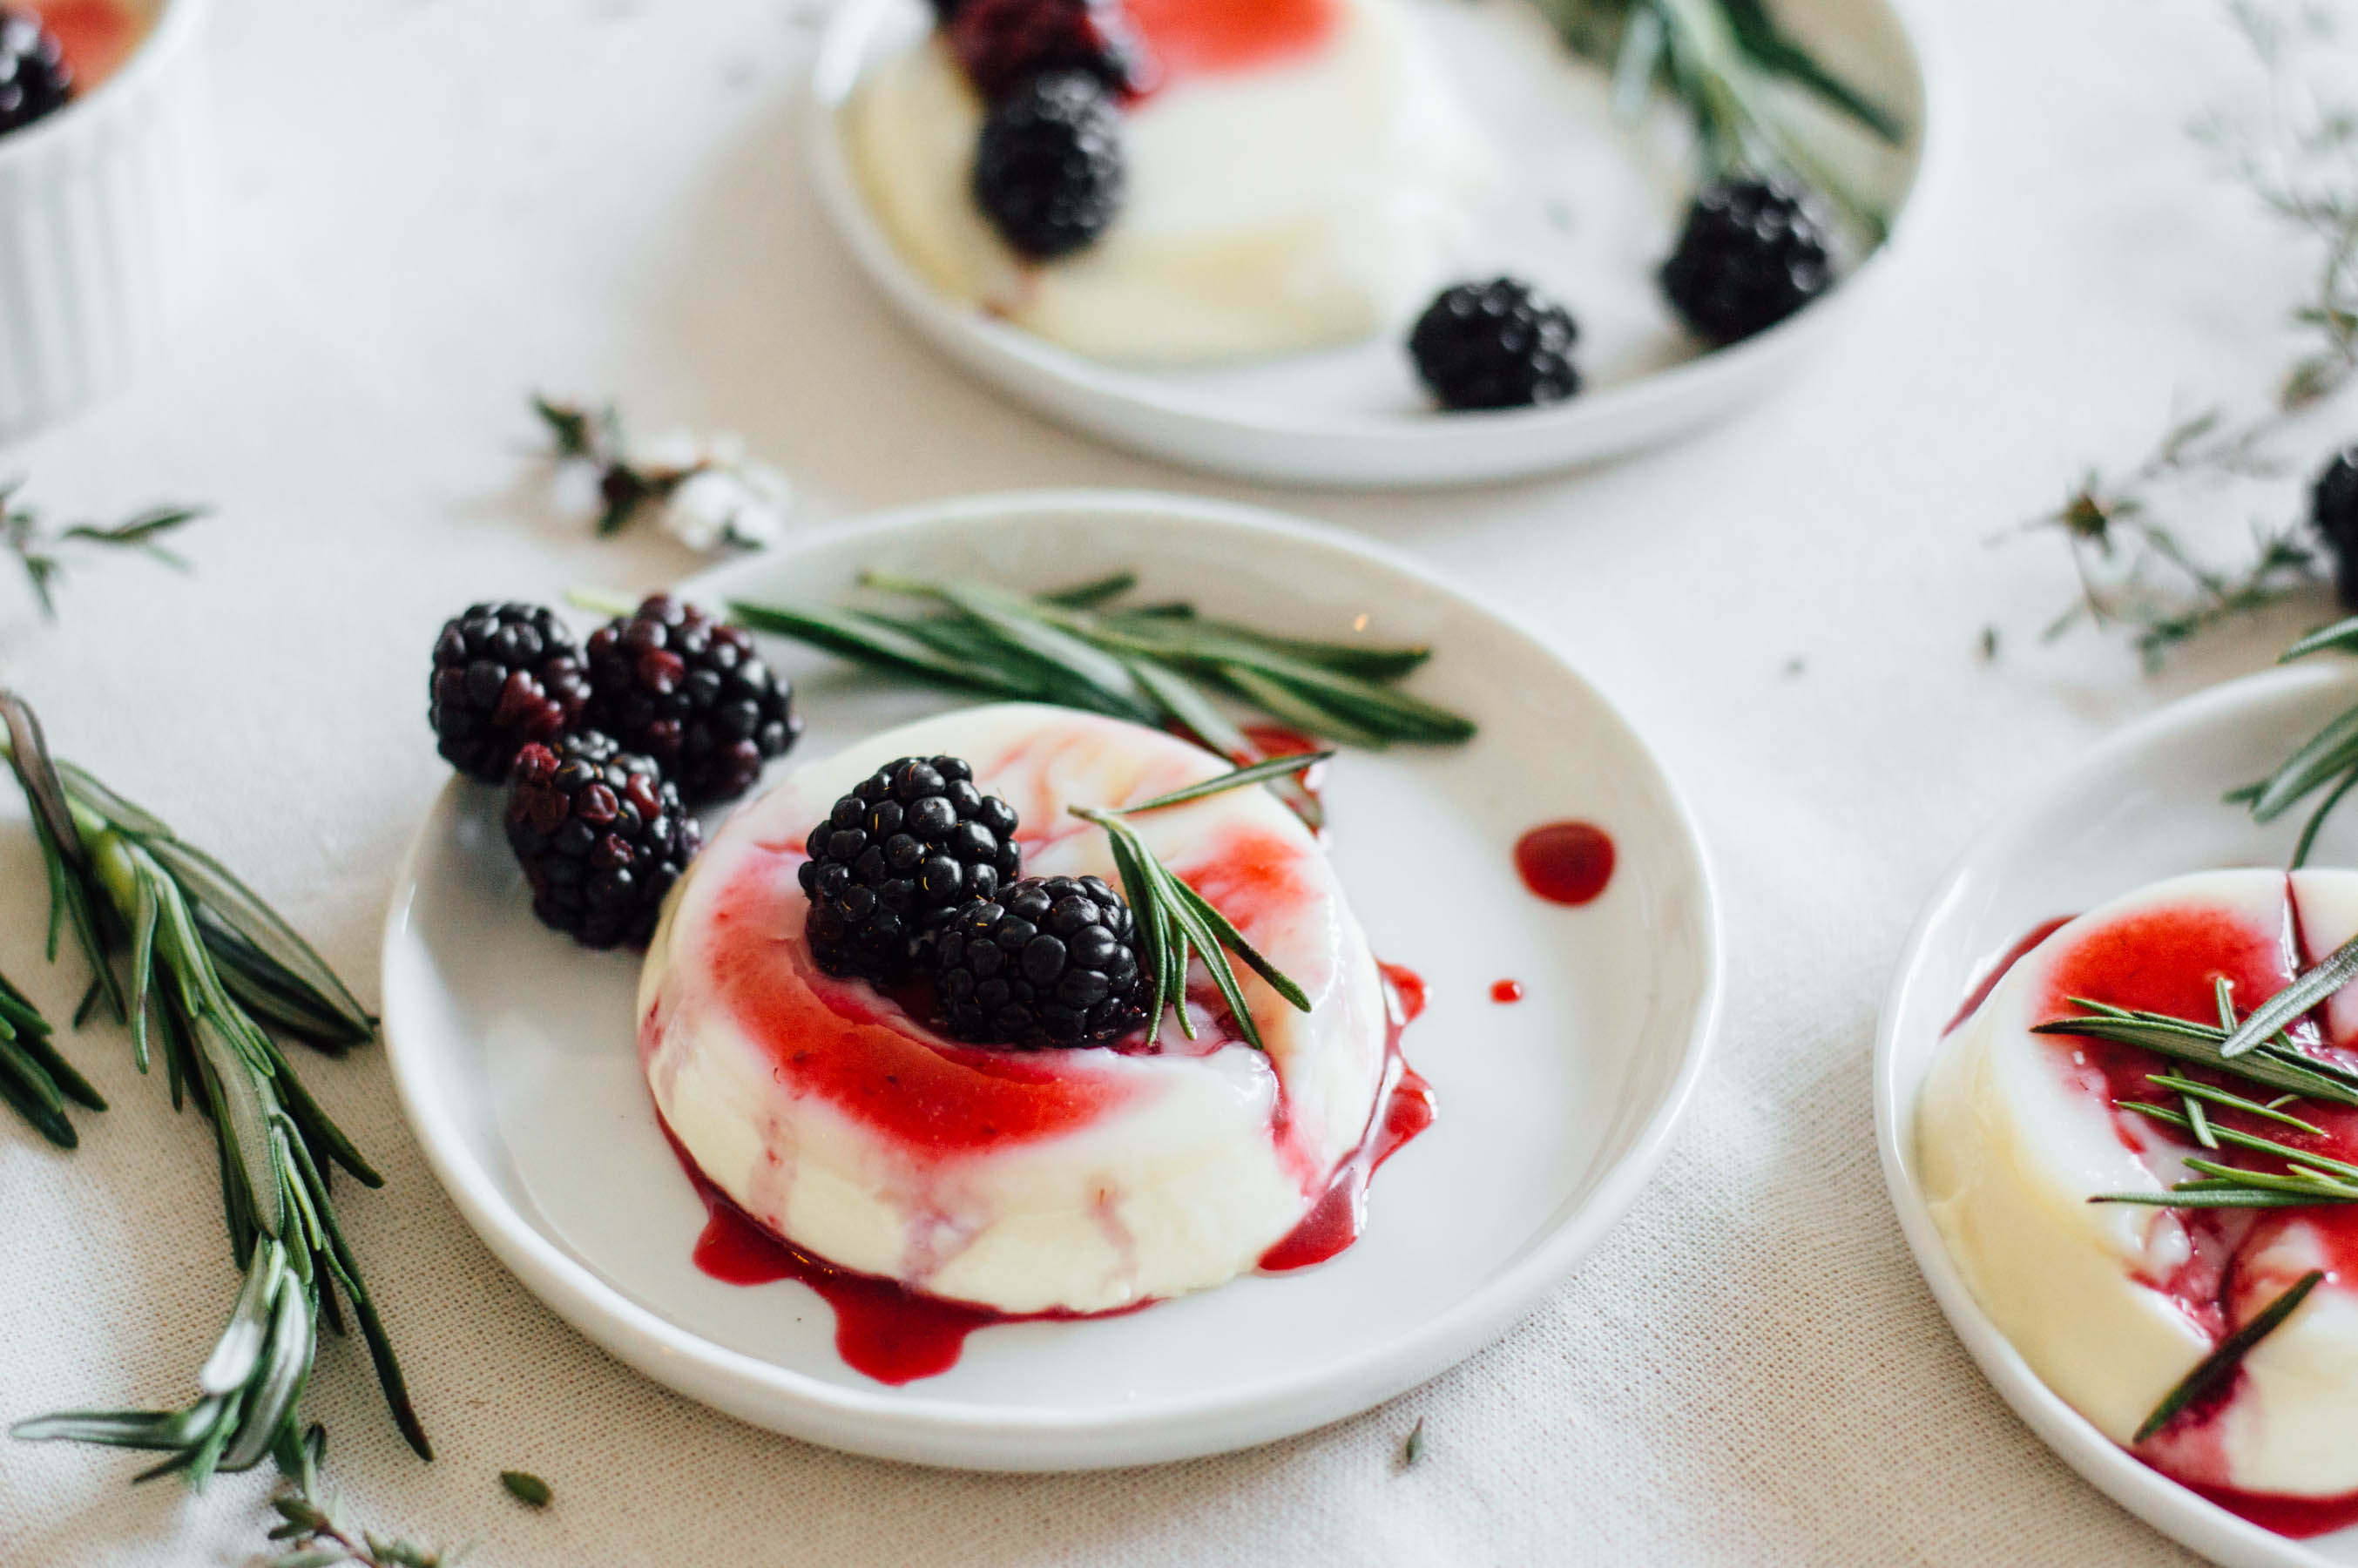 Easy dessert recipe for your next event - a Lavender Panna Cotta recipe with a Blackberry, Rosemary, & Gin Syrup | bygabriella.co